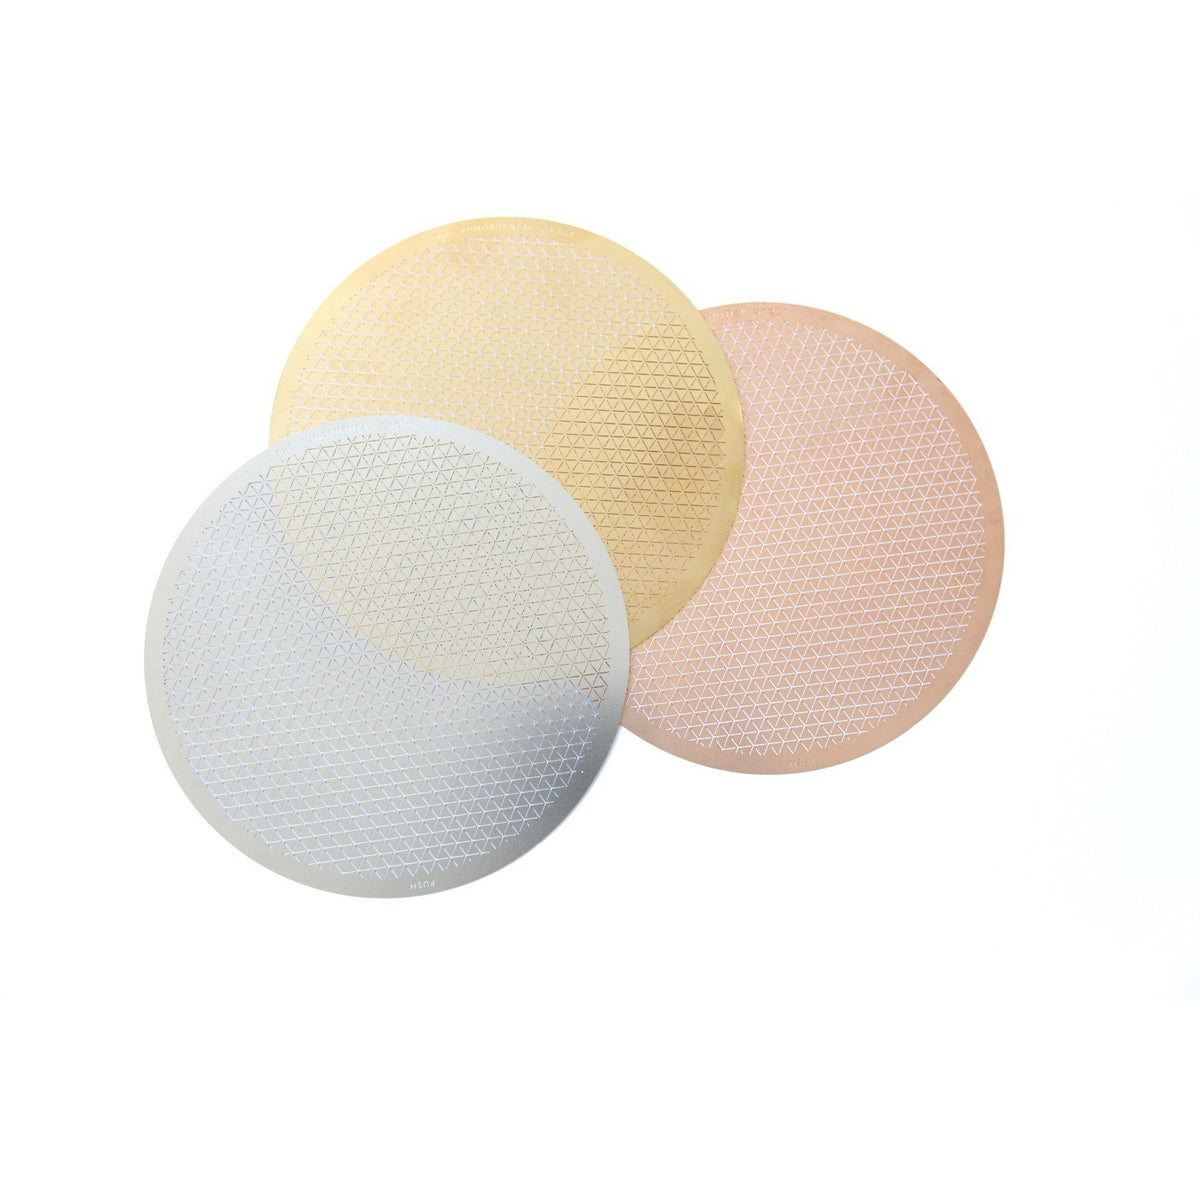 Push Mini Bowls: Set of 3 fanned out.